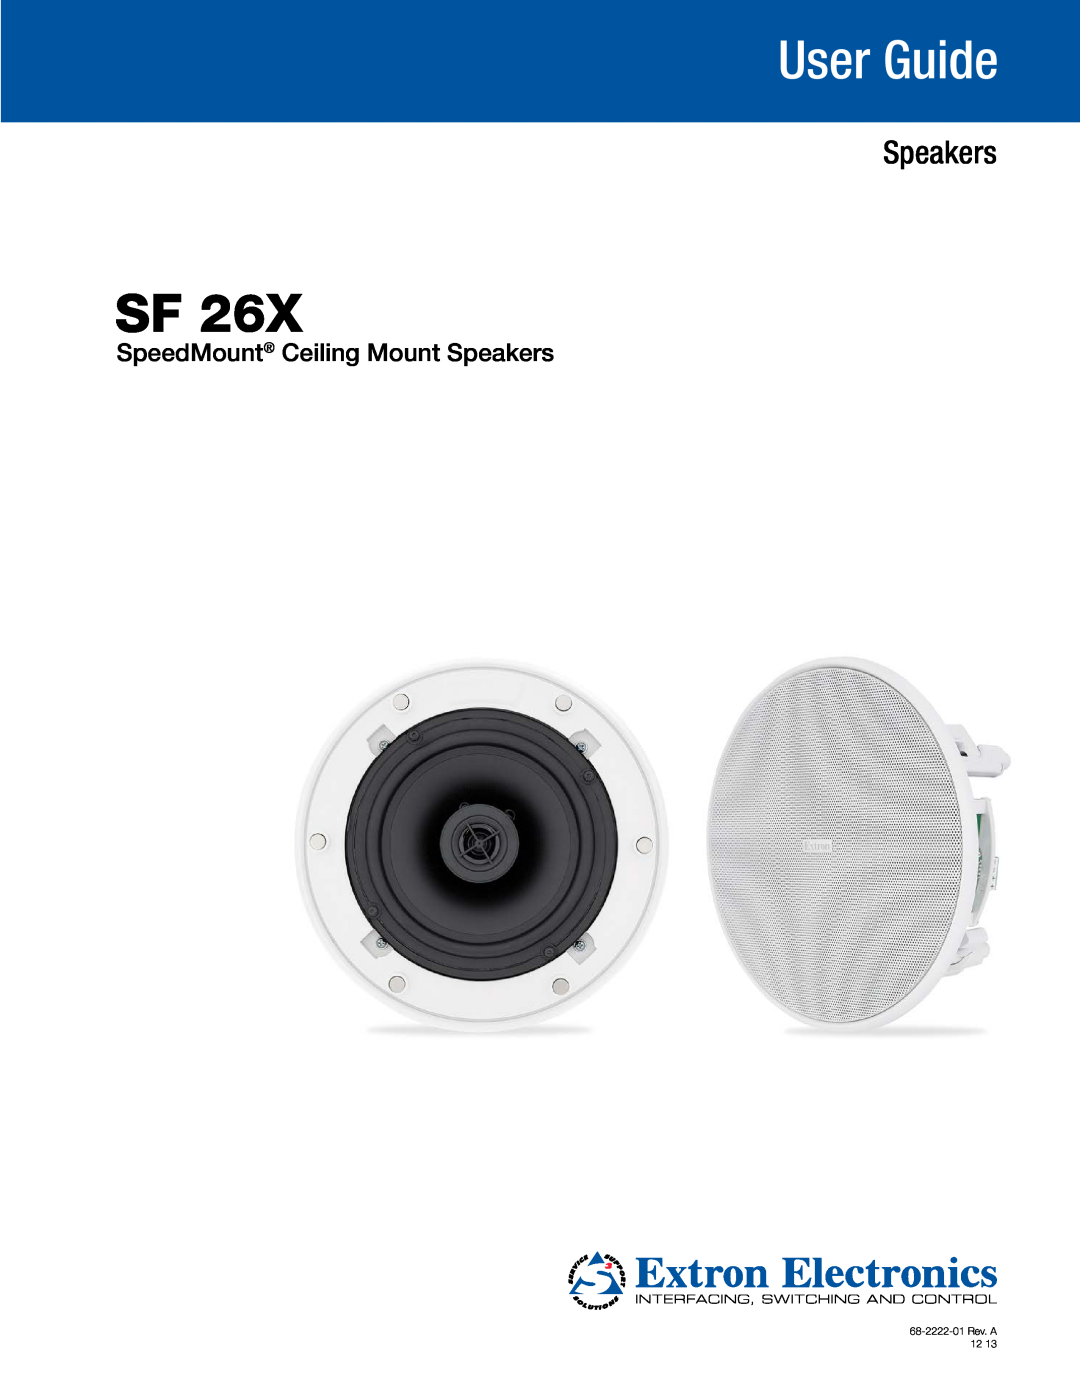 Extron electronic SF 26X manual User Guide, SpeedMount Ceiling Mount Speakers 